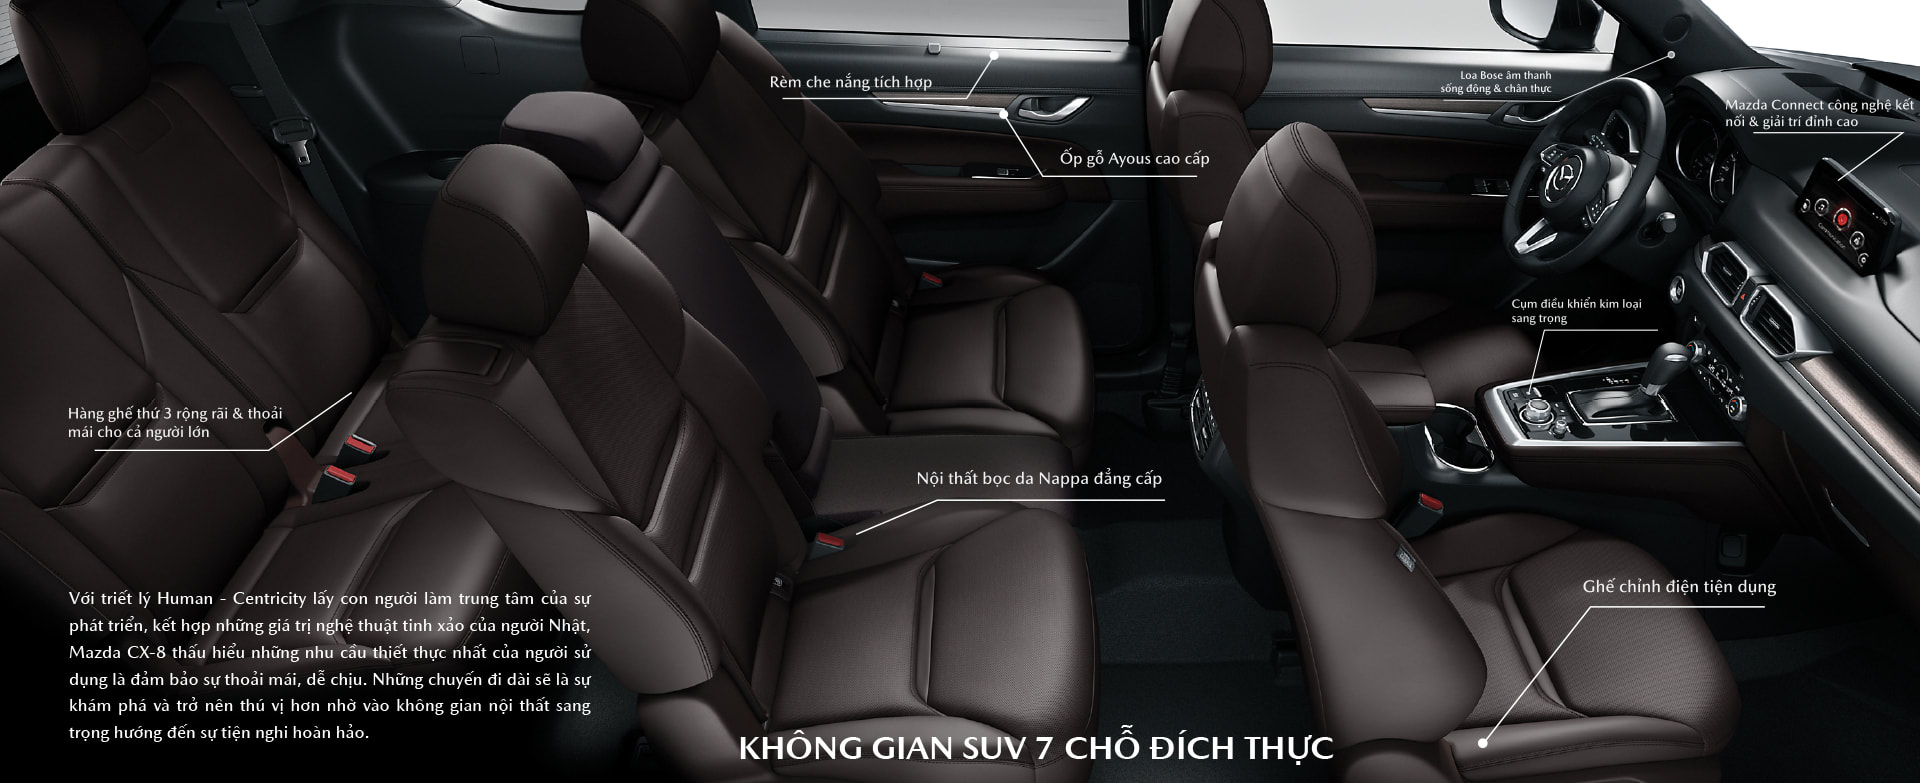 toan canh noi that mazda cx8